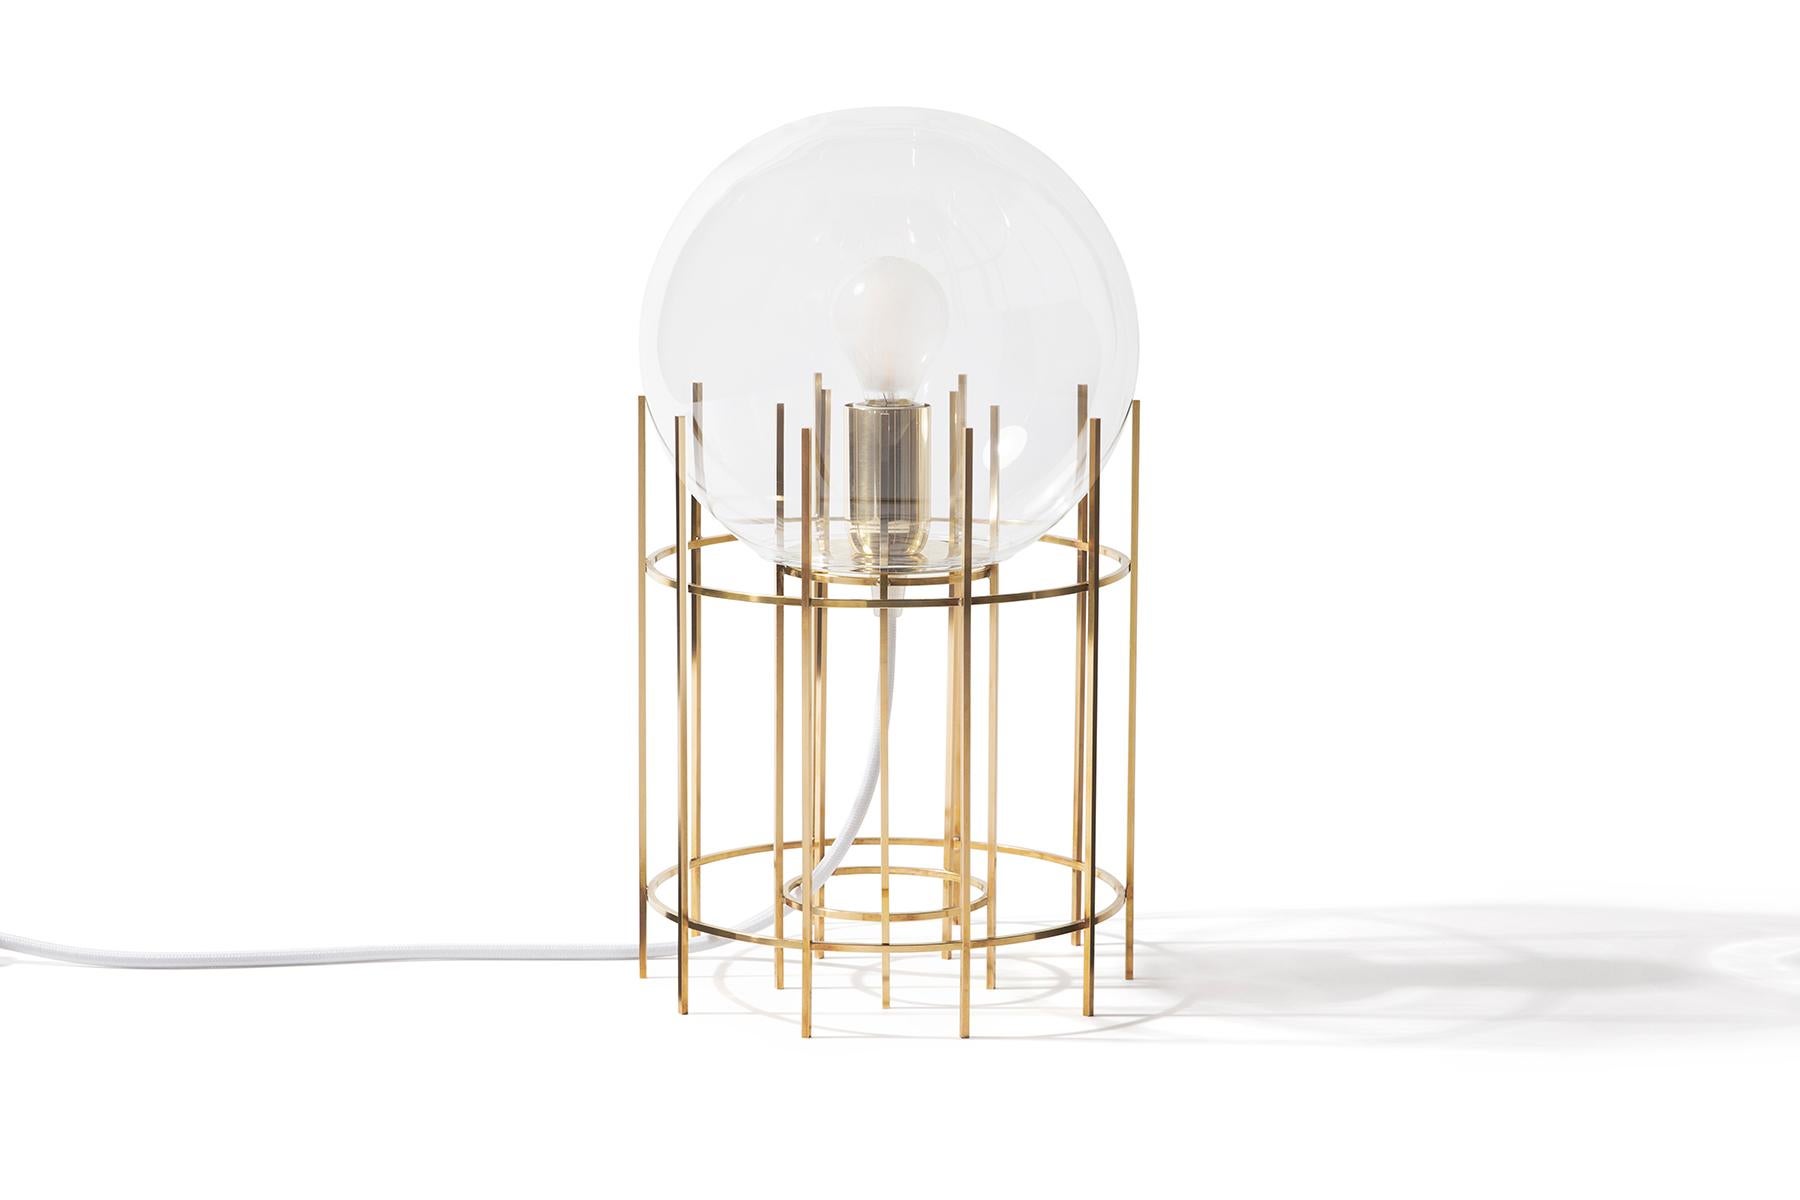 Table lamp inspired by the architecture of water towers, made in hand polished brass and blown glass diffuser.
Design GoodMorning Studio for Daythings

(These are products made in Italy by artisanal processes. Material and color variation and slight